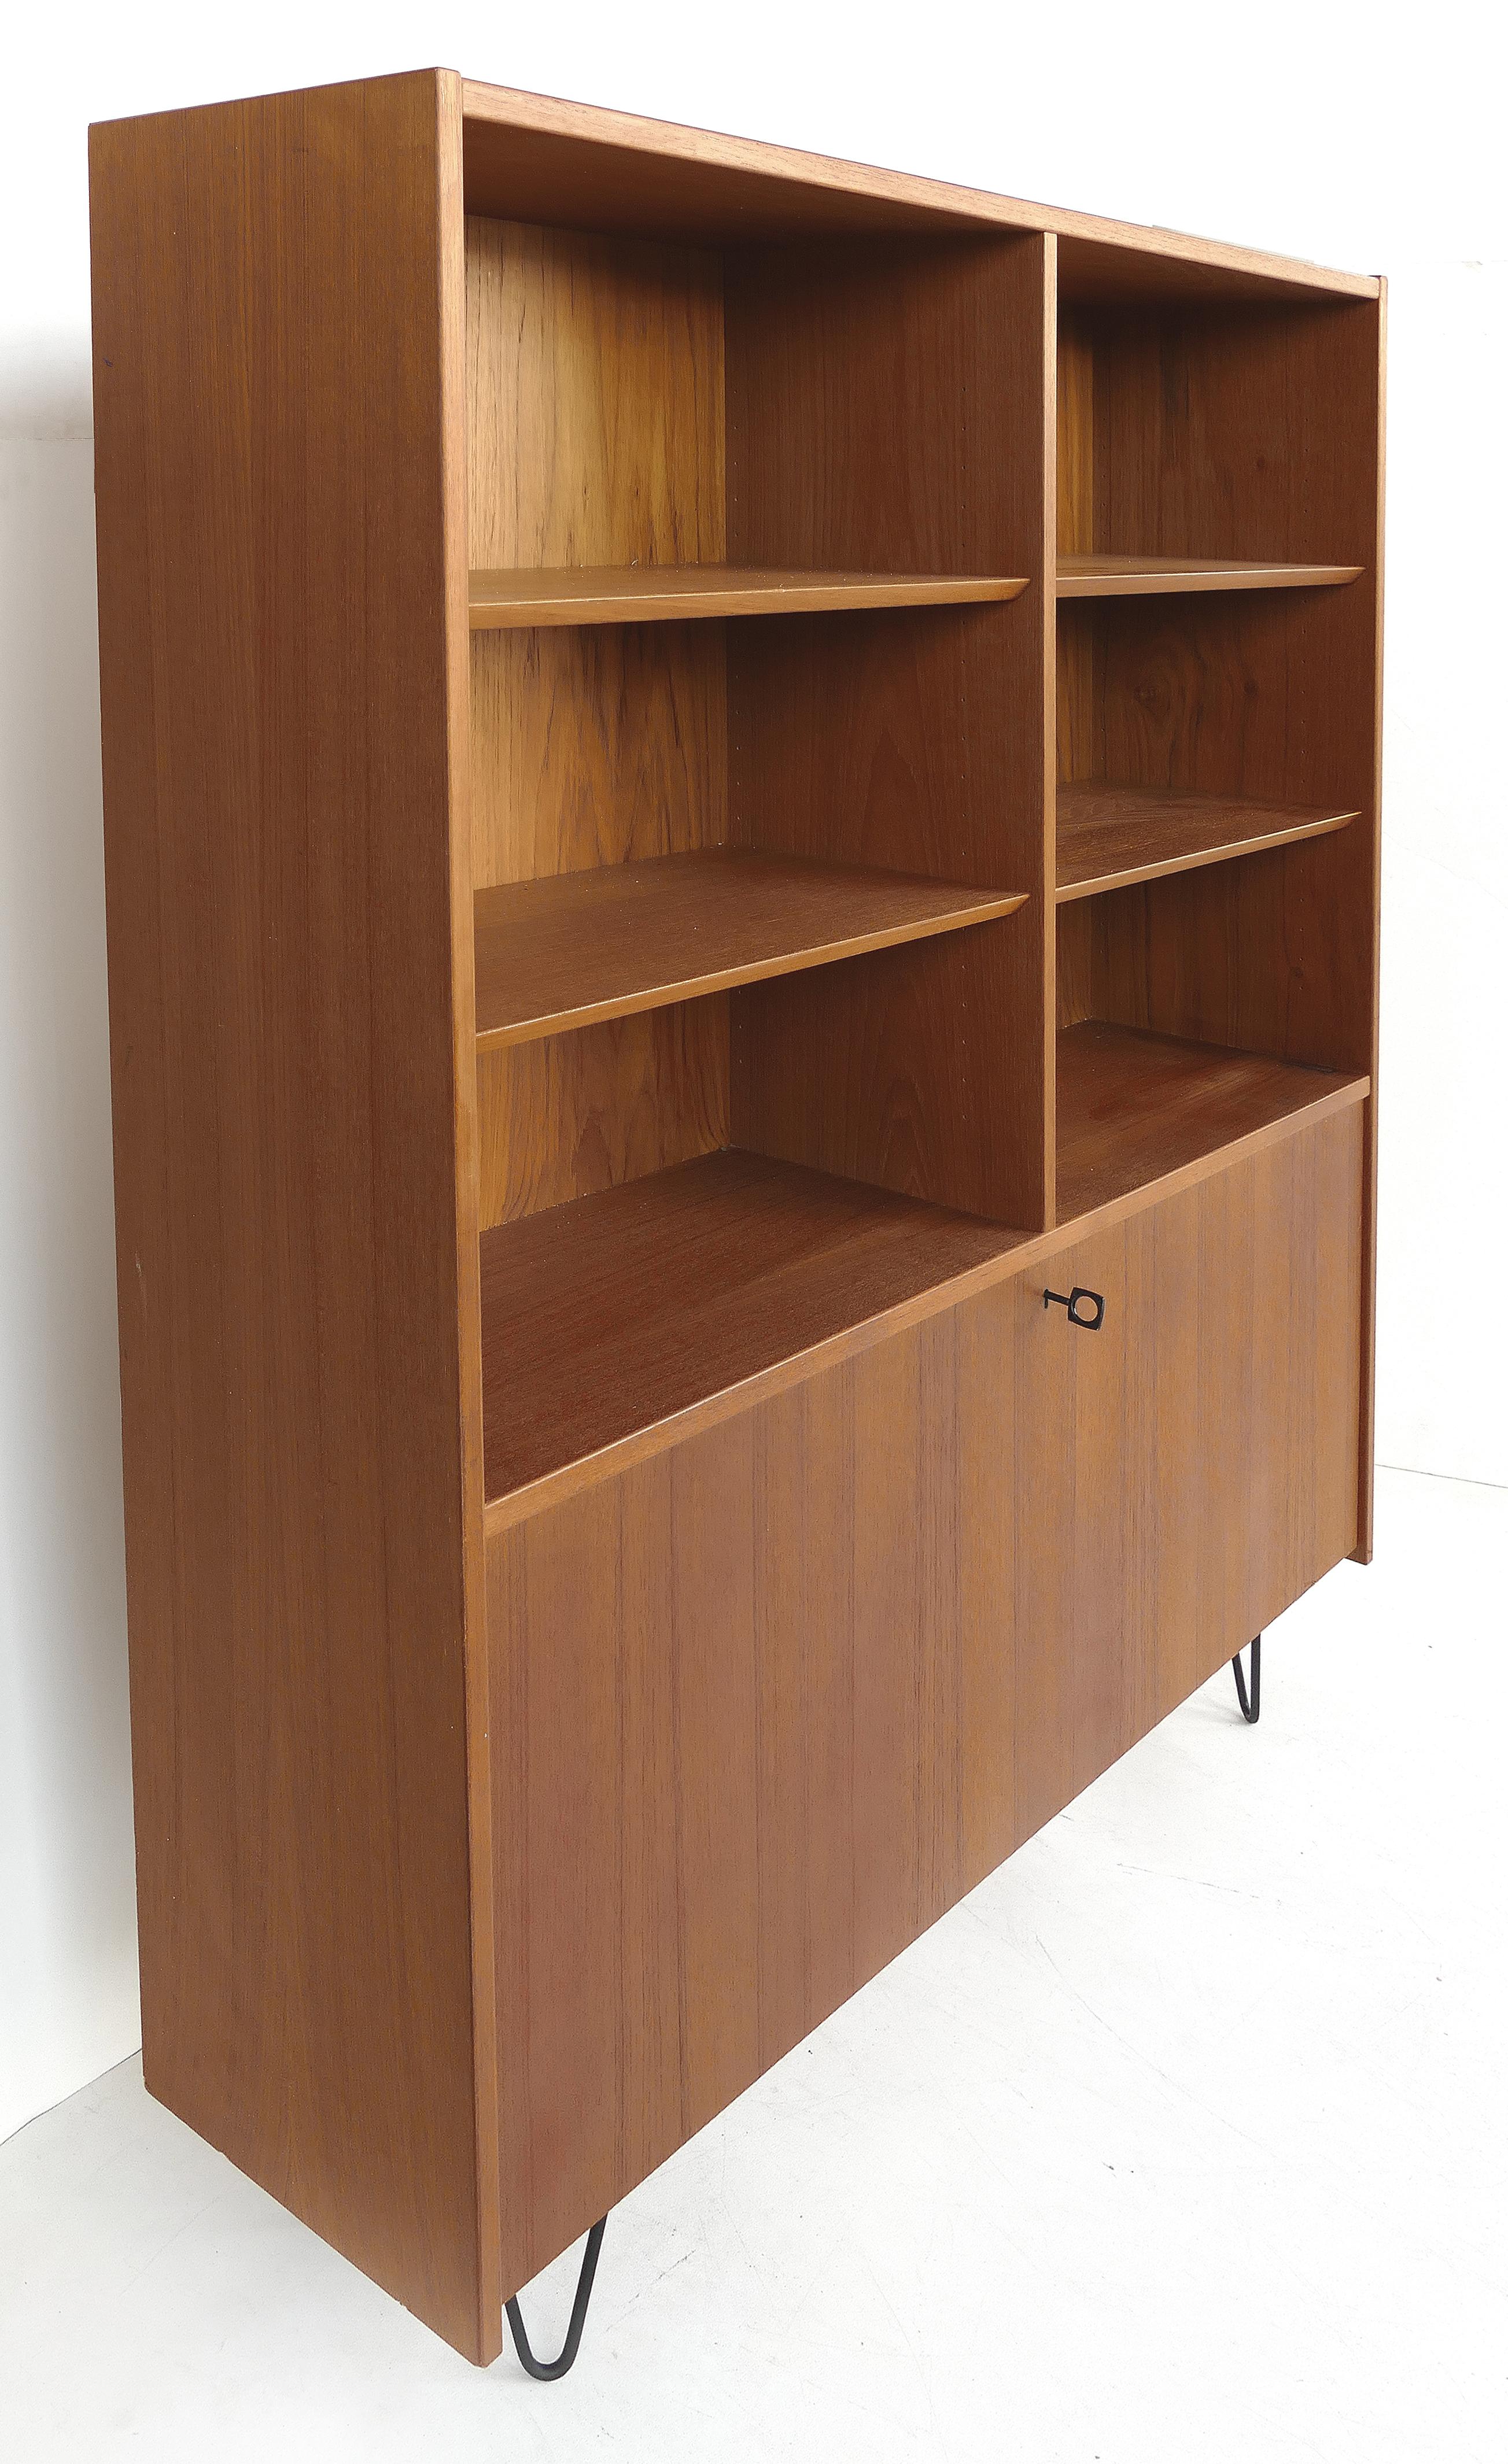 Poul Hundevad Danish modern teak wall unit on hairpin legs

Offered for sales is a Danish modern teak wall unit by Poul Hundevard from Sweden. The unit has a keyed drop front secretary compartment with slotted shelves within. The upper portion has